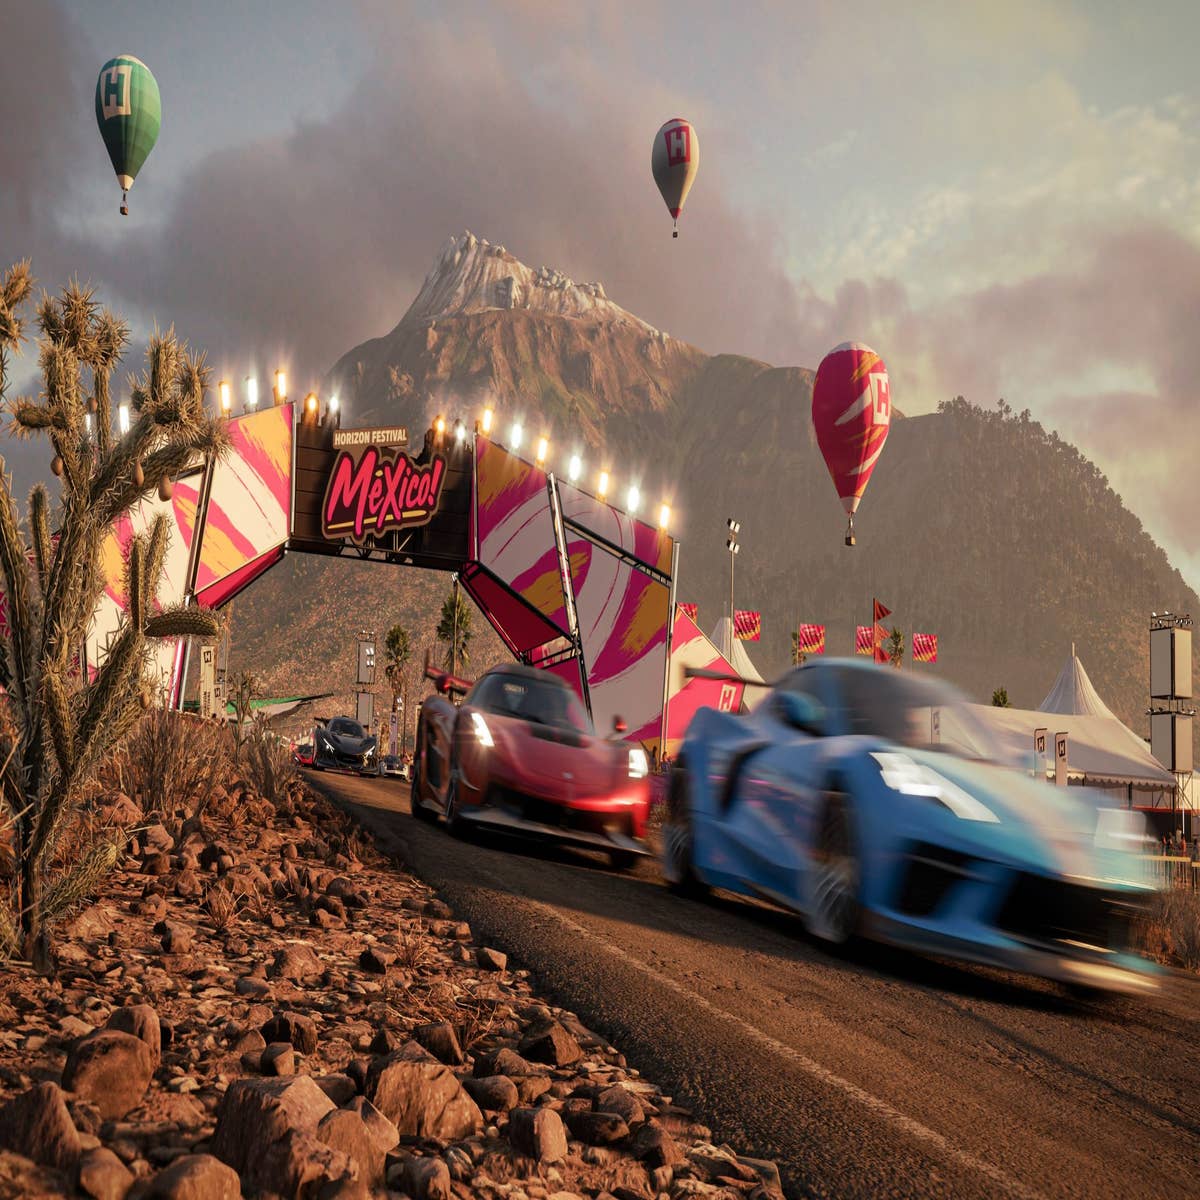 Turn Forza Horizon 3 Into a Hot Wheels Playground With This New